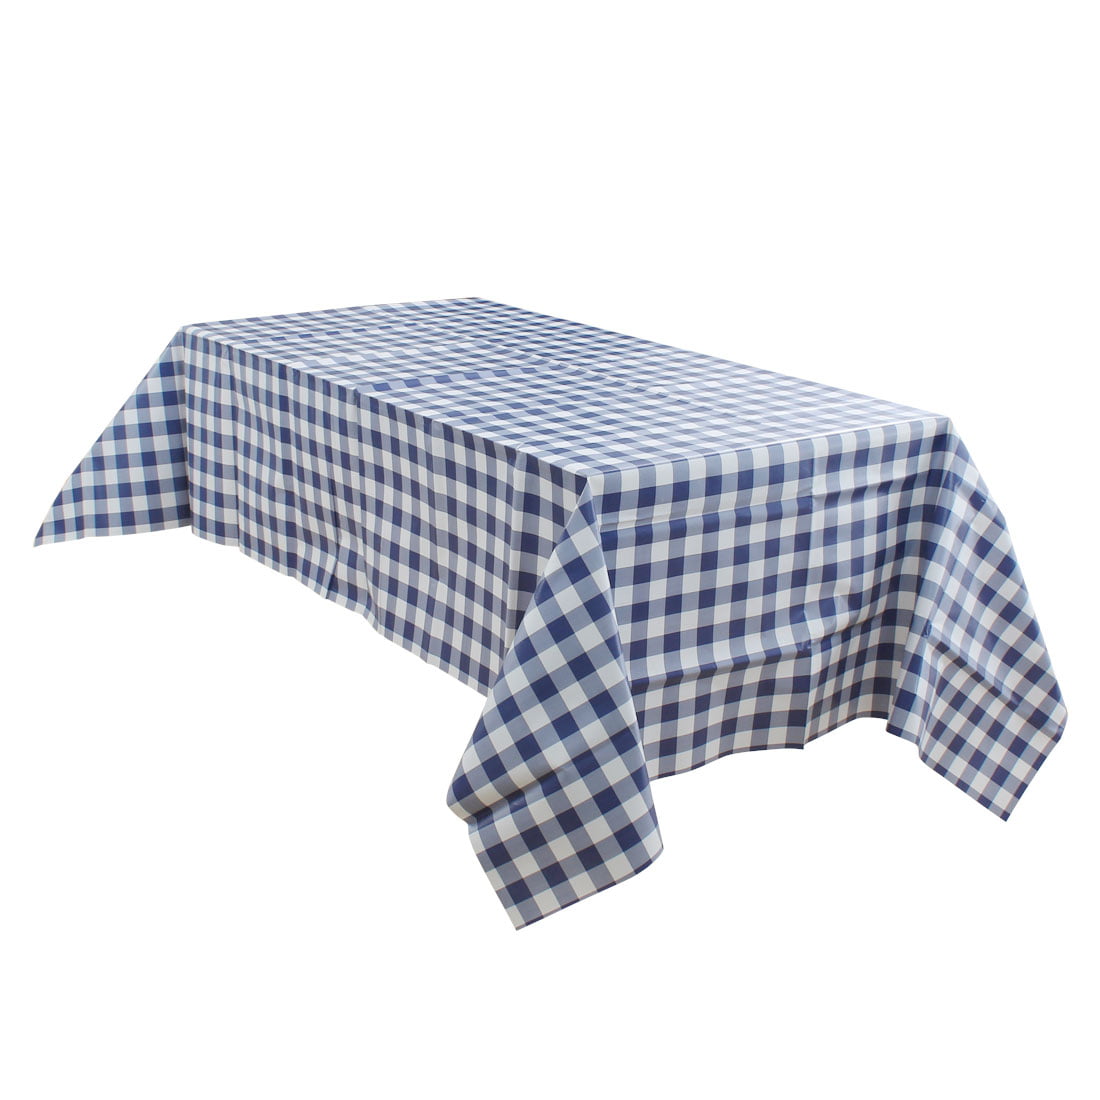 Details about   New Dining Green Polka Dot Garden Picnic Summer Patio In & Outdoor Tablecloth 